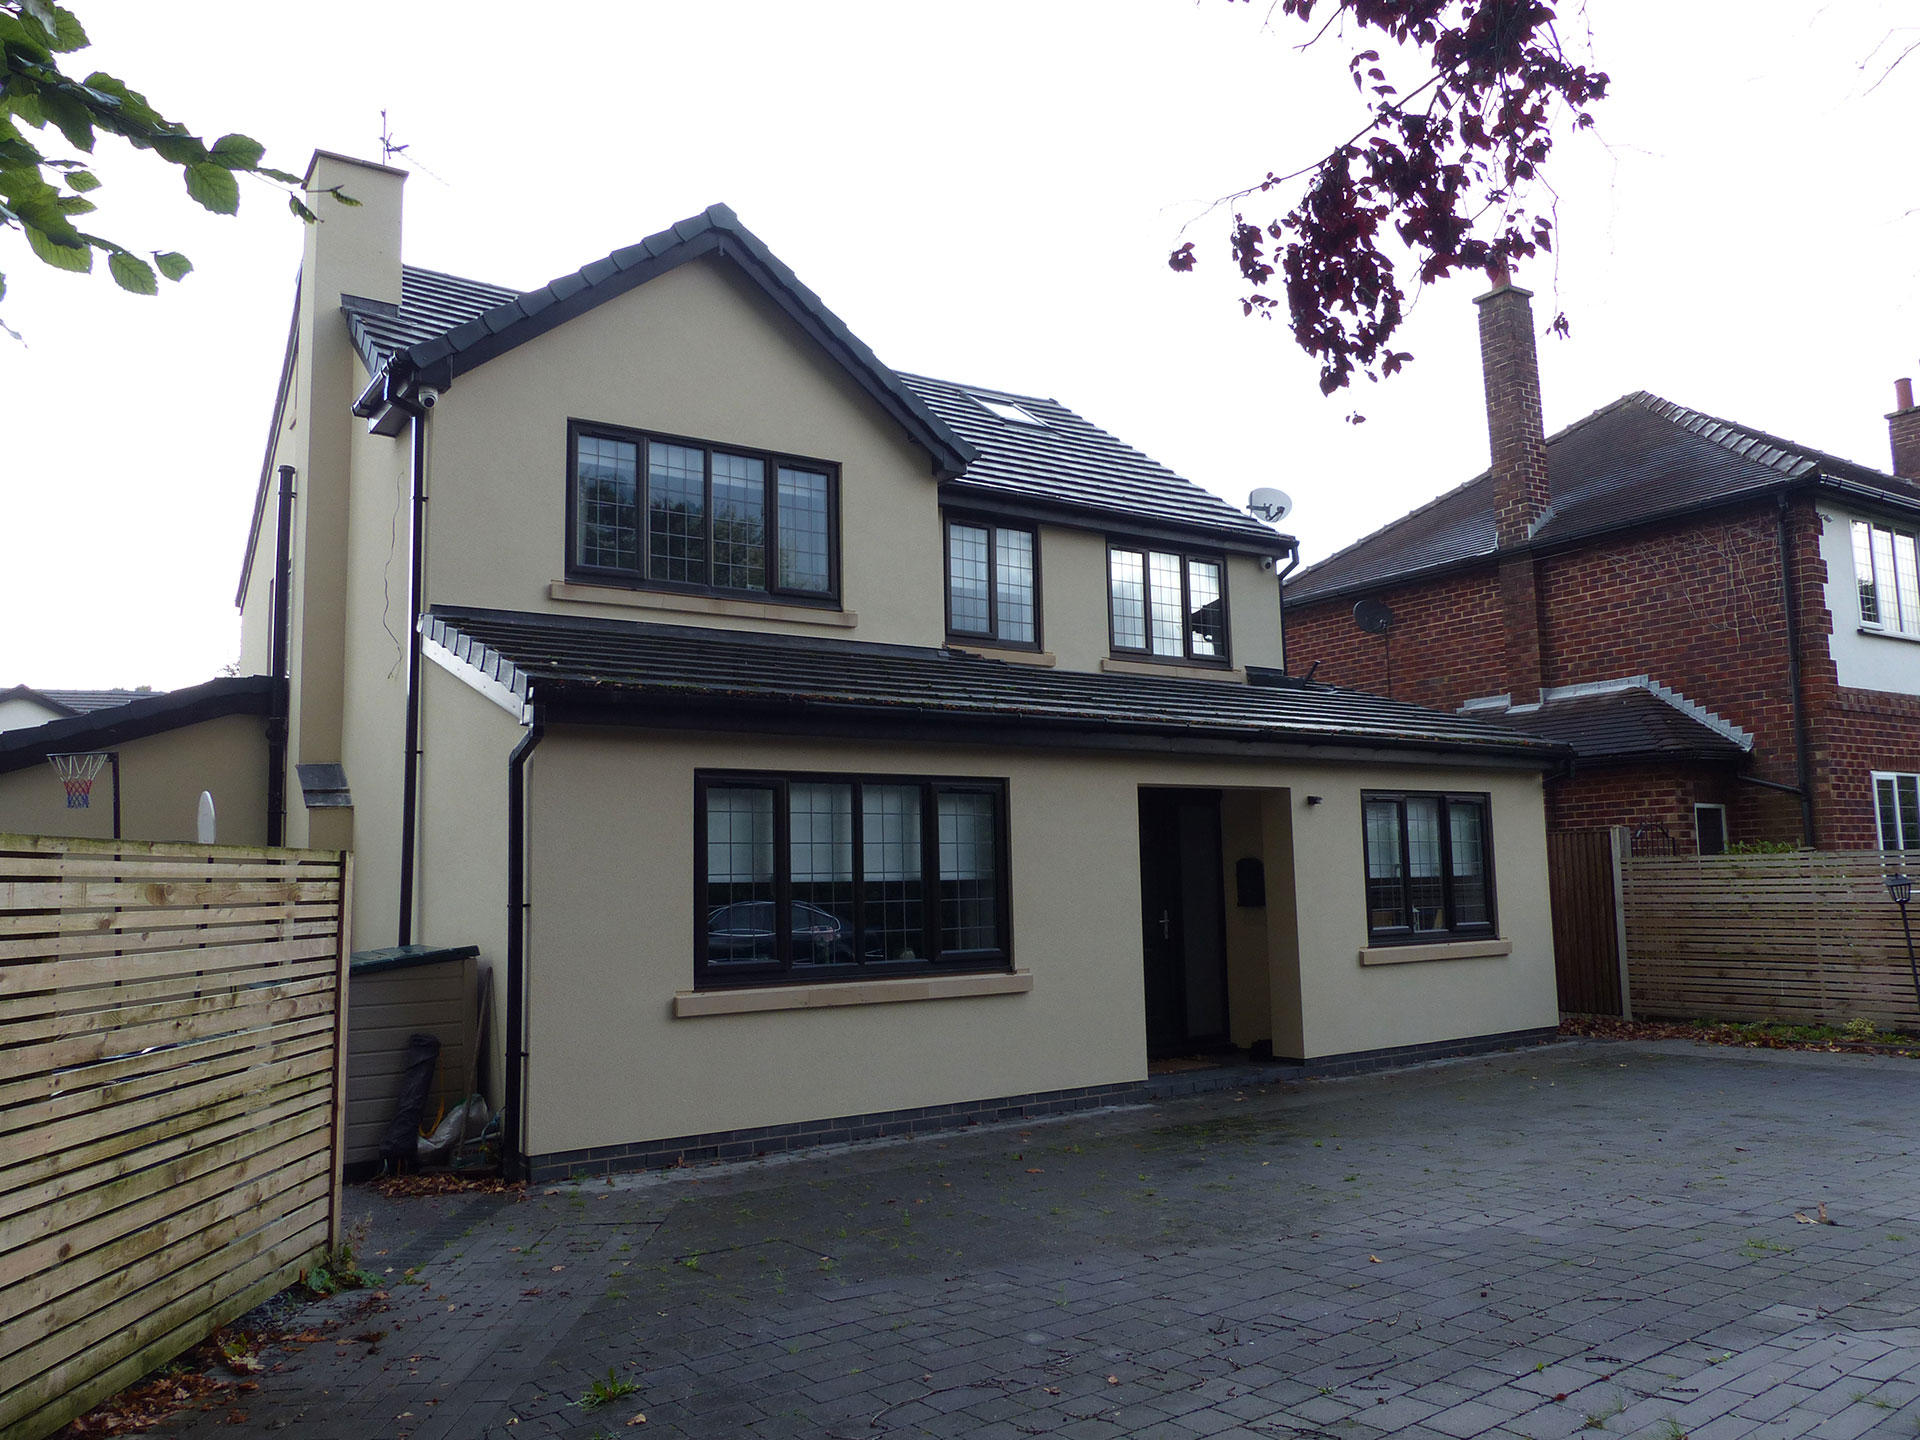 House remodelling, extension and landscaping in Bramhall Cheshire